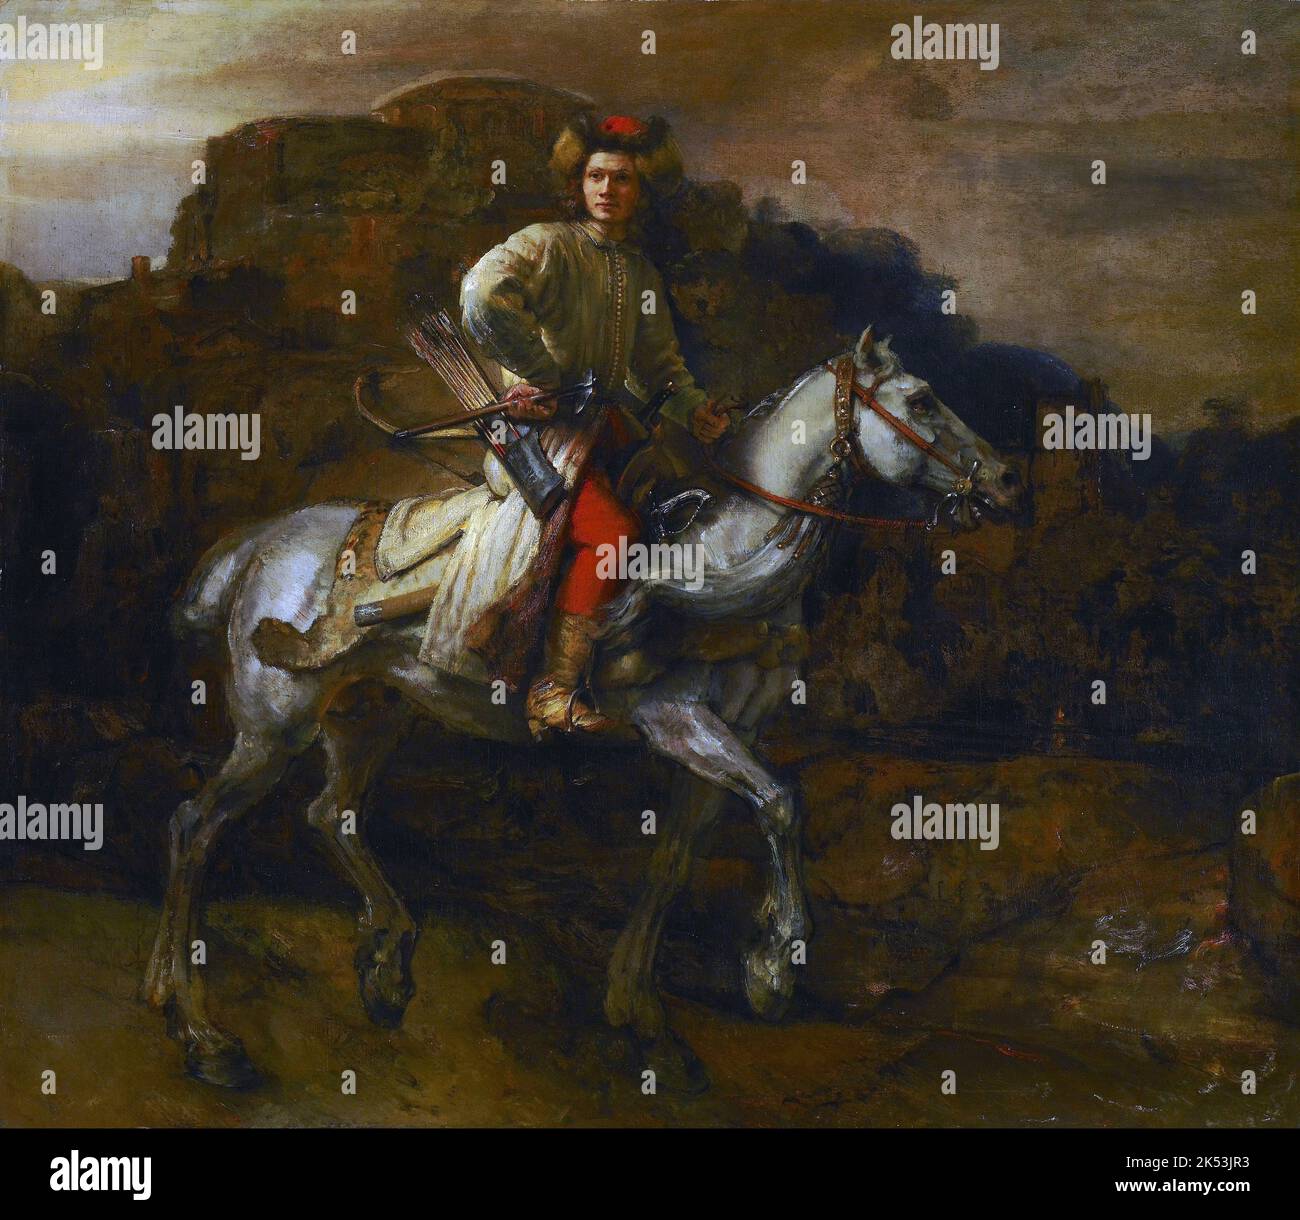 The Polish Rider – Possibly a Lisowczyk on horseback, Painting by Rembrandt Stock Photo